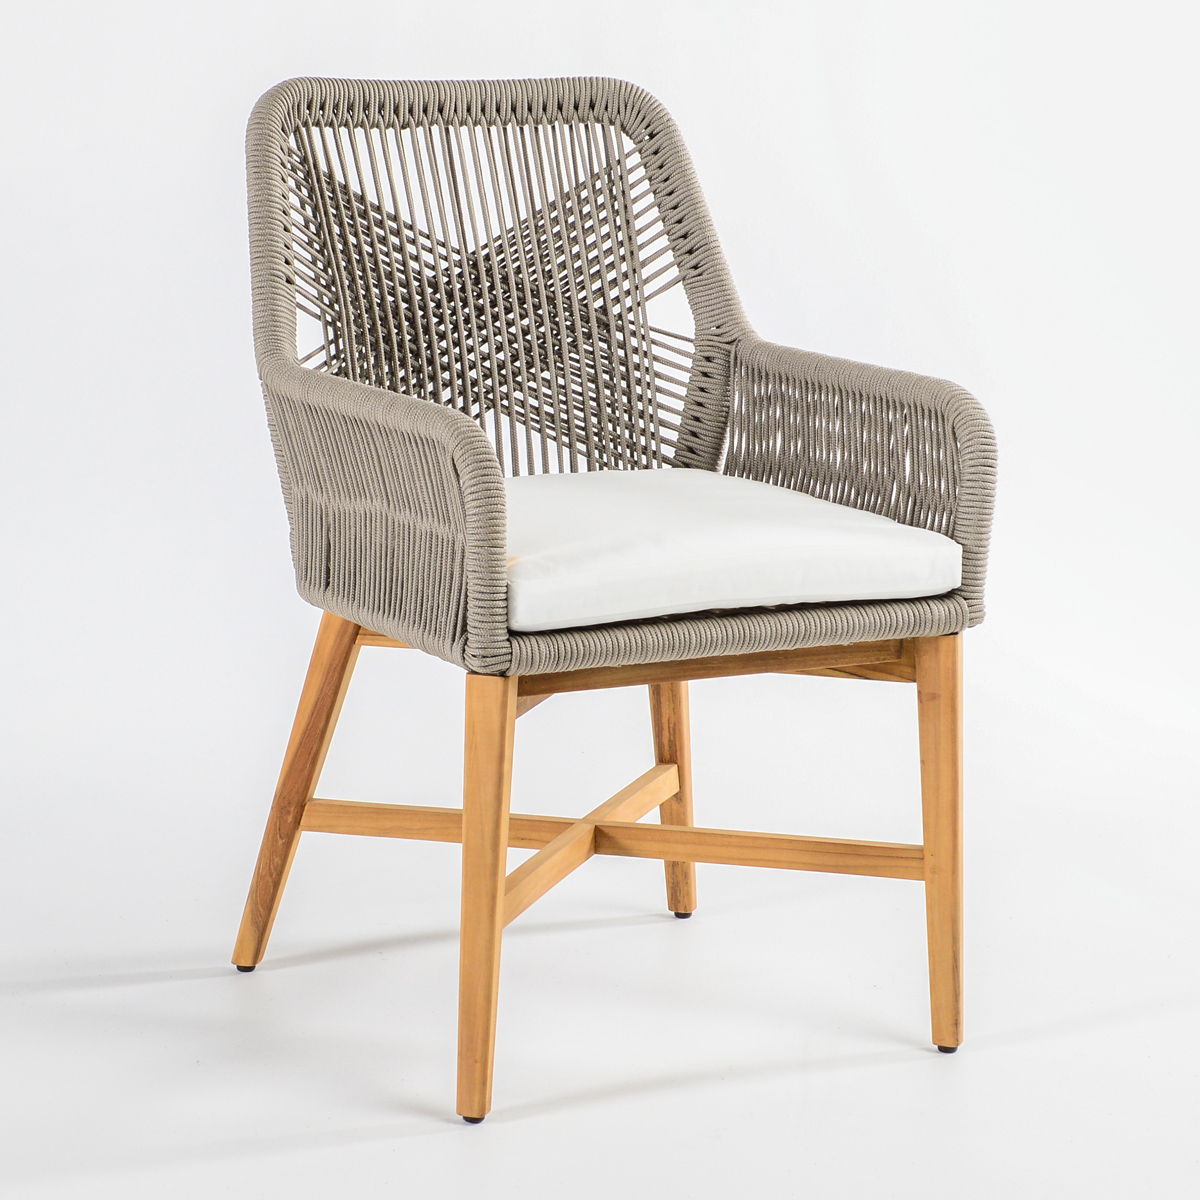 Marley - Outdoor Dining Chair - Gray